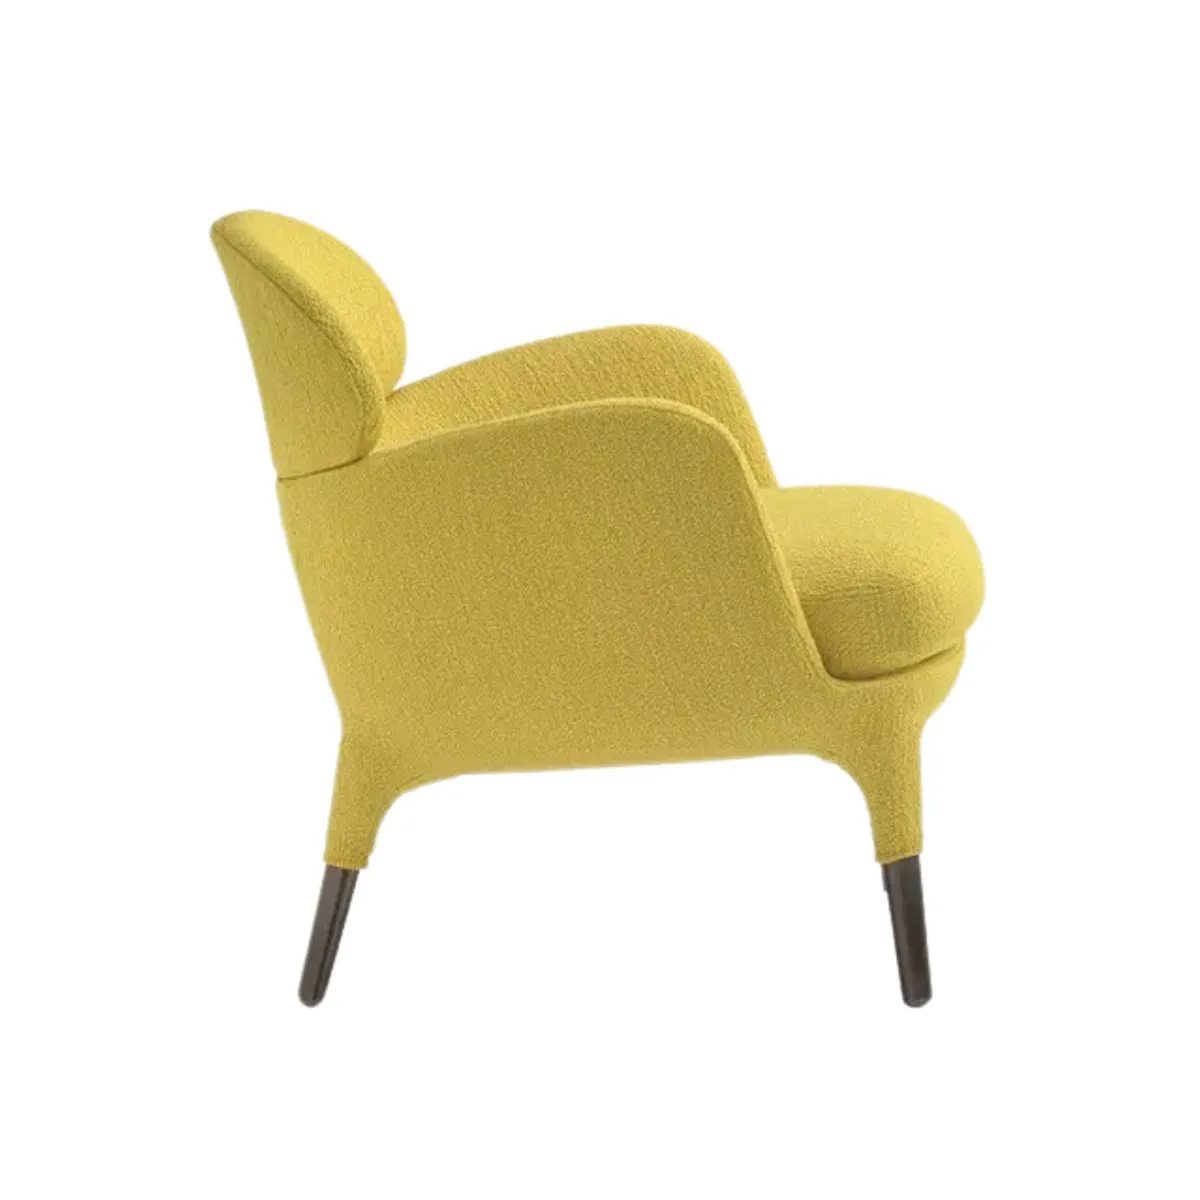 Ester lounge chair 2